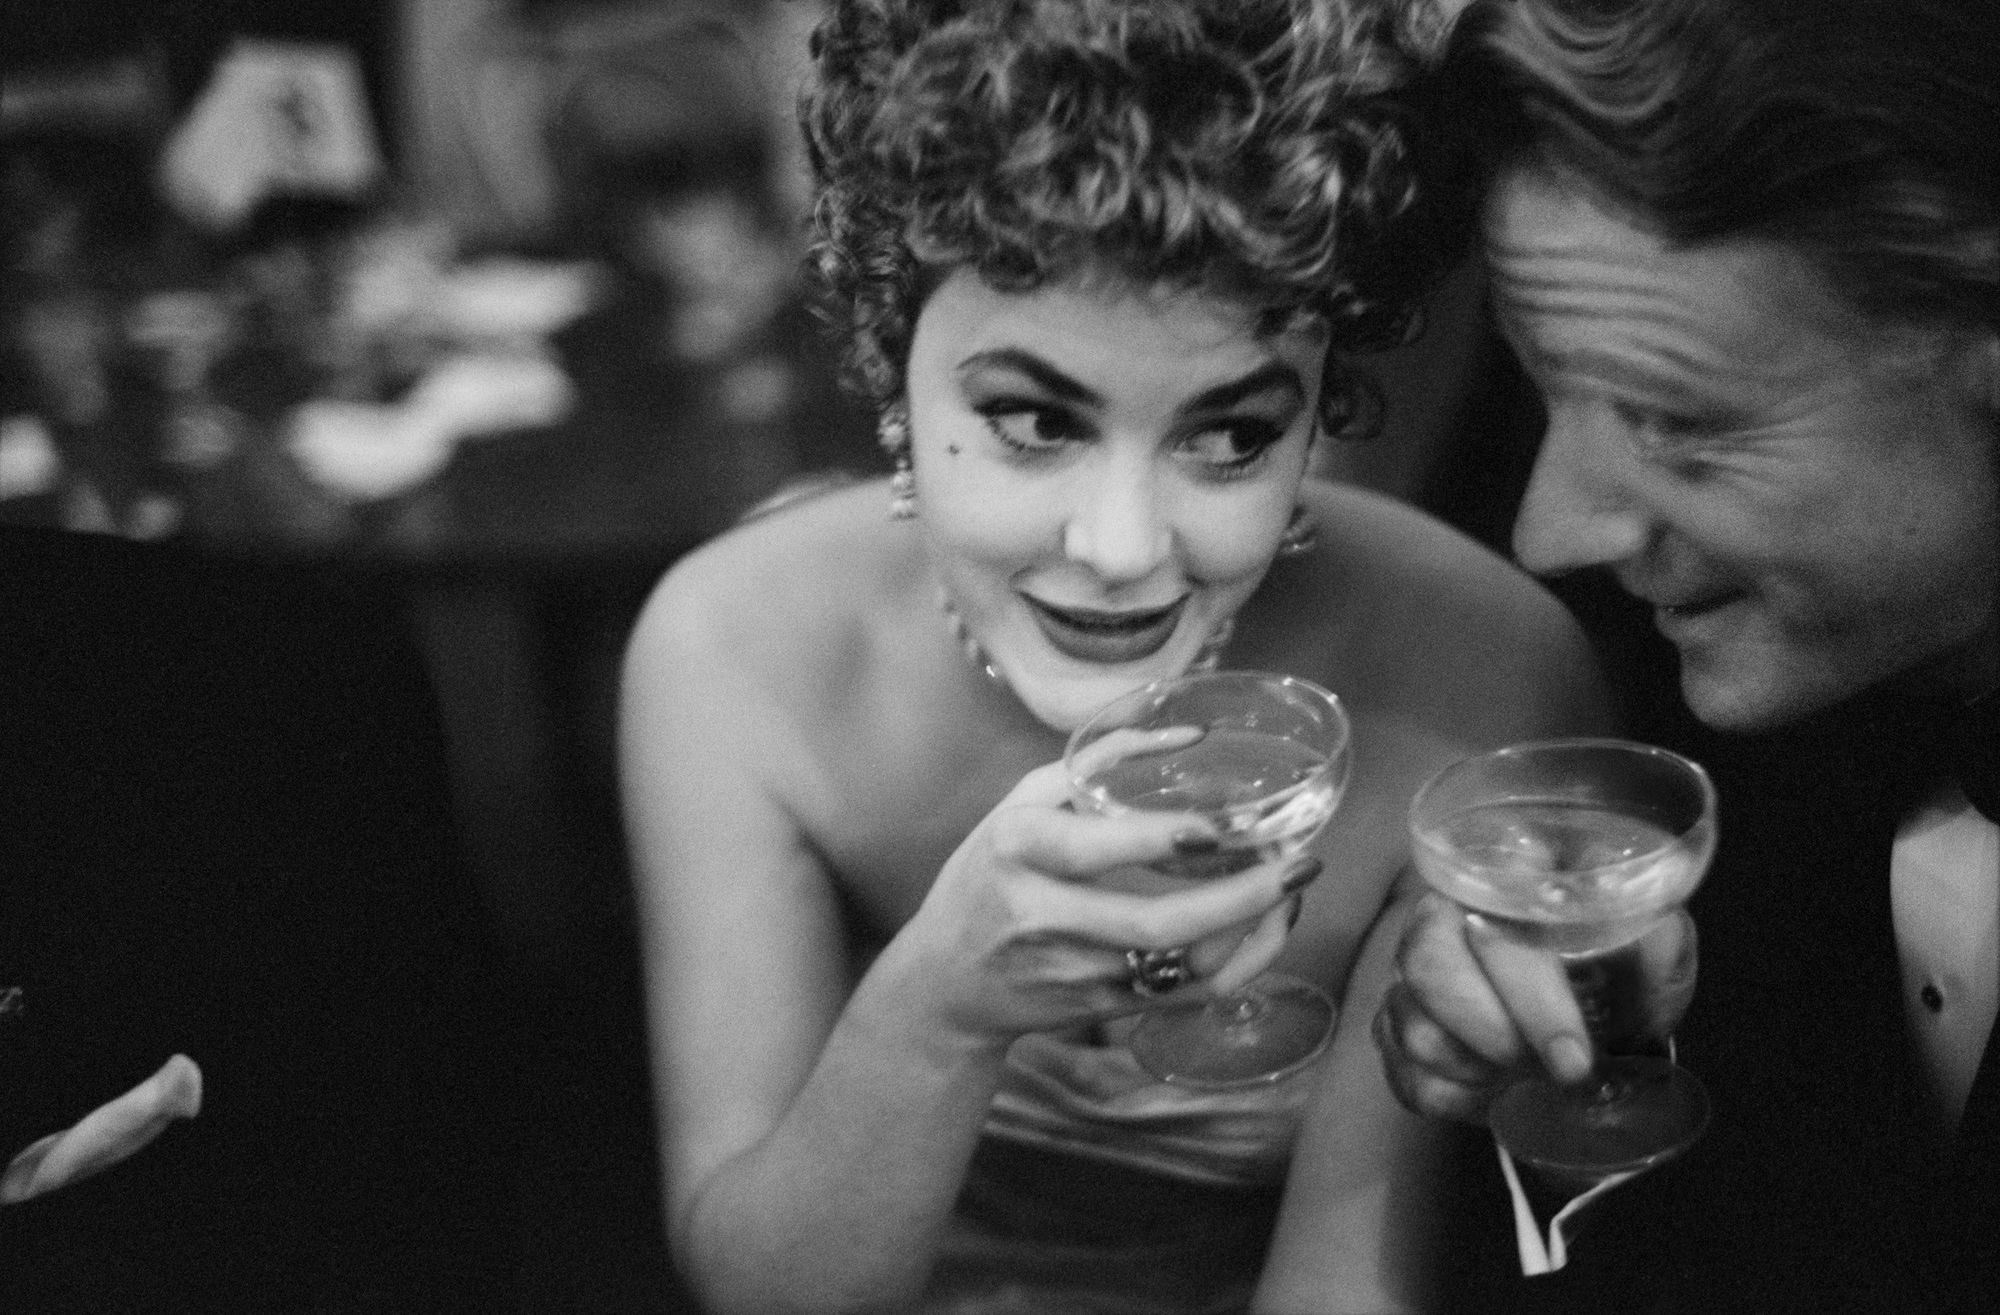 Gary Winogrand, two with cocktails, journal of wild culture 